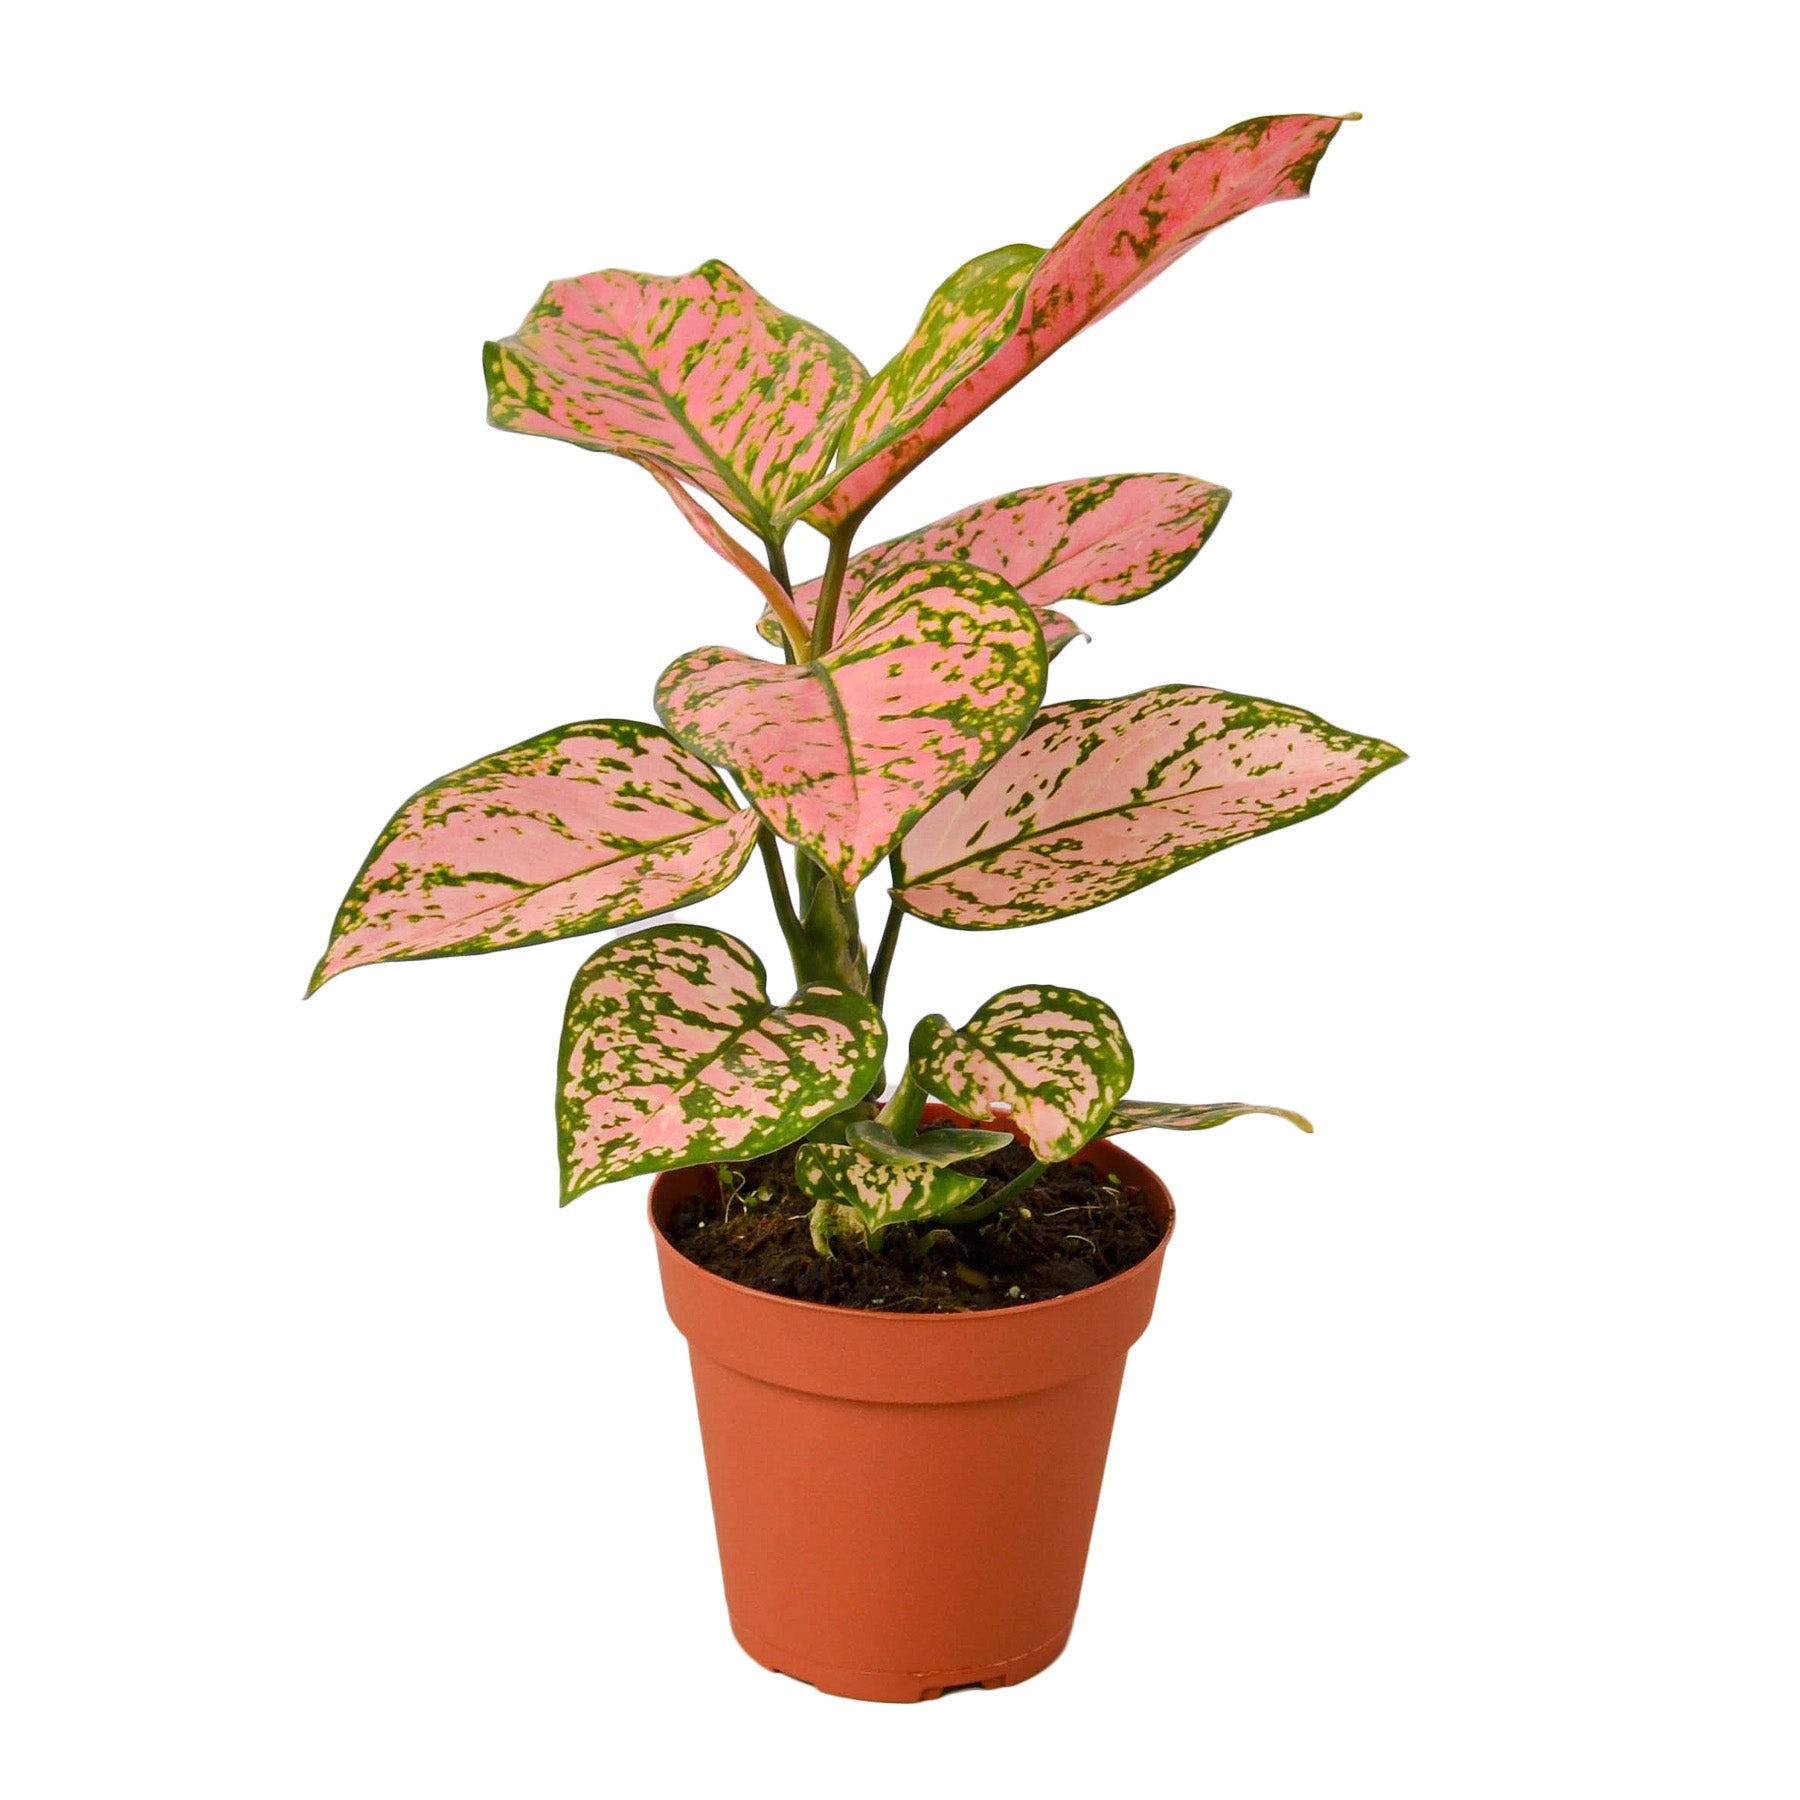 A vibrant pink and green plant in a pot on a clean white background.